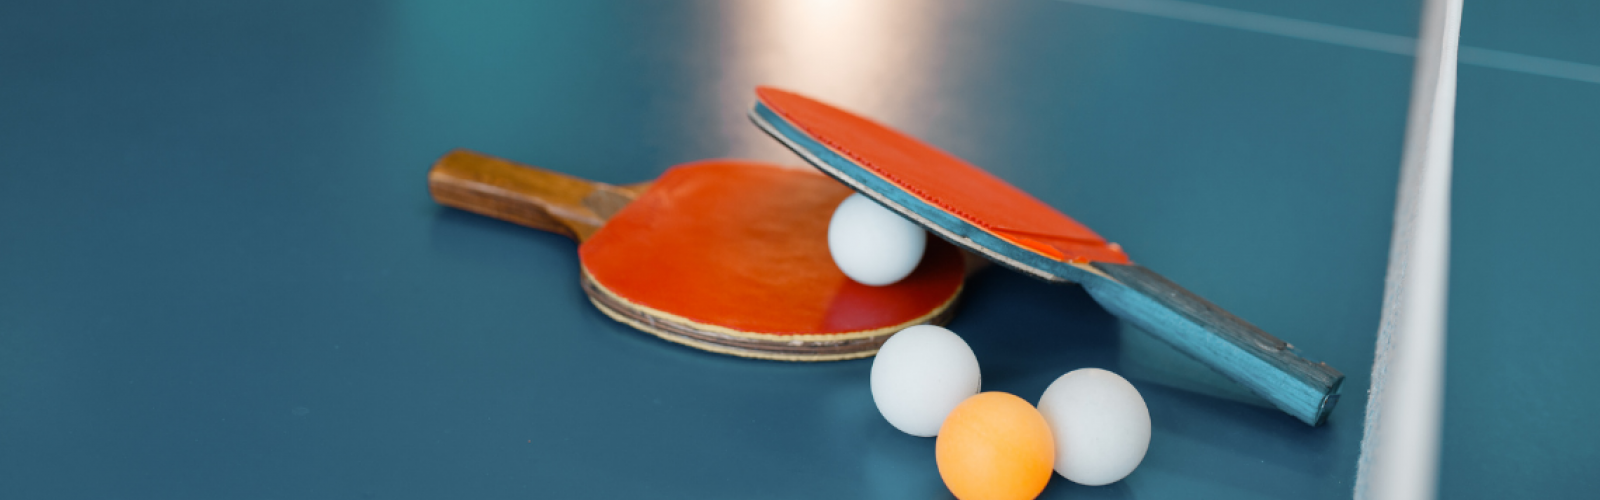 So how did ping pong start?